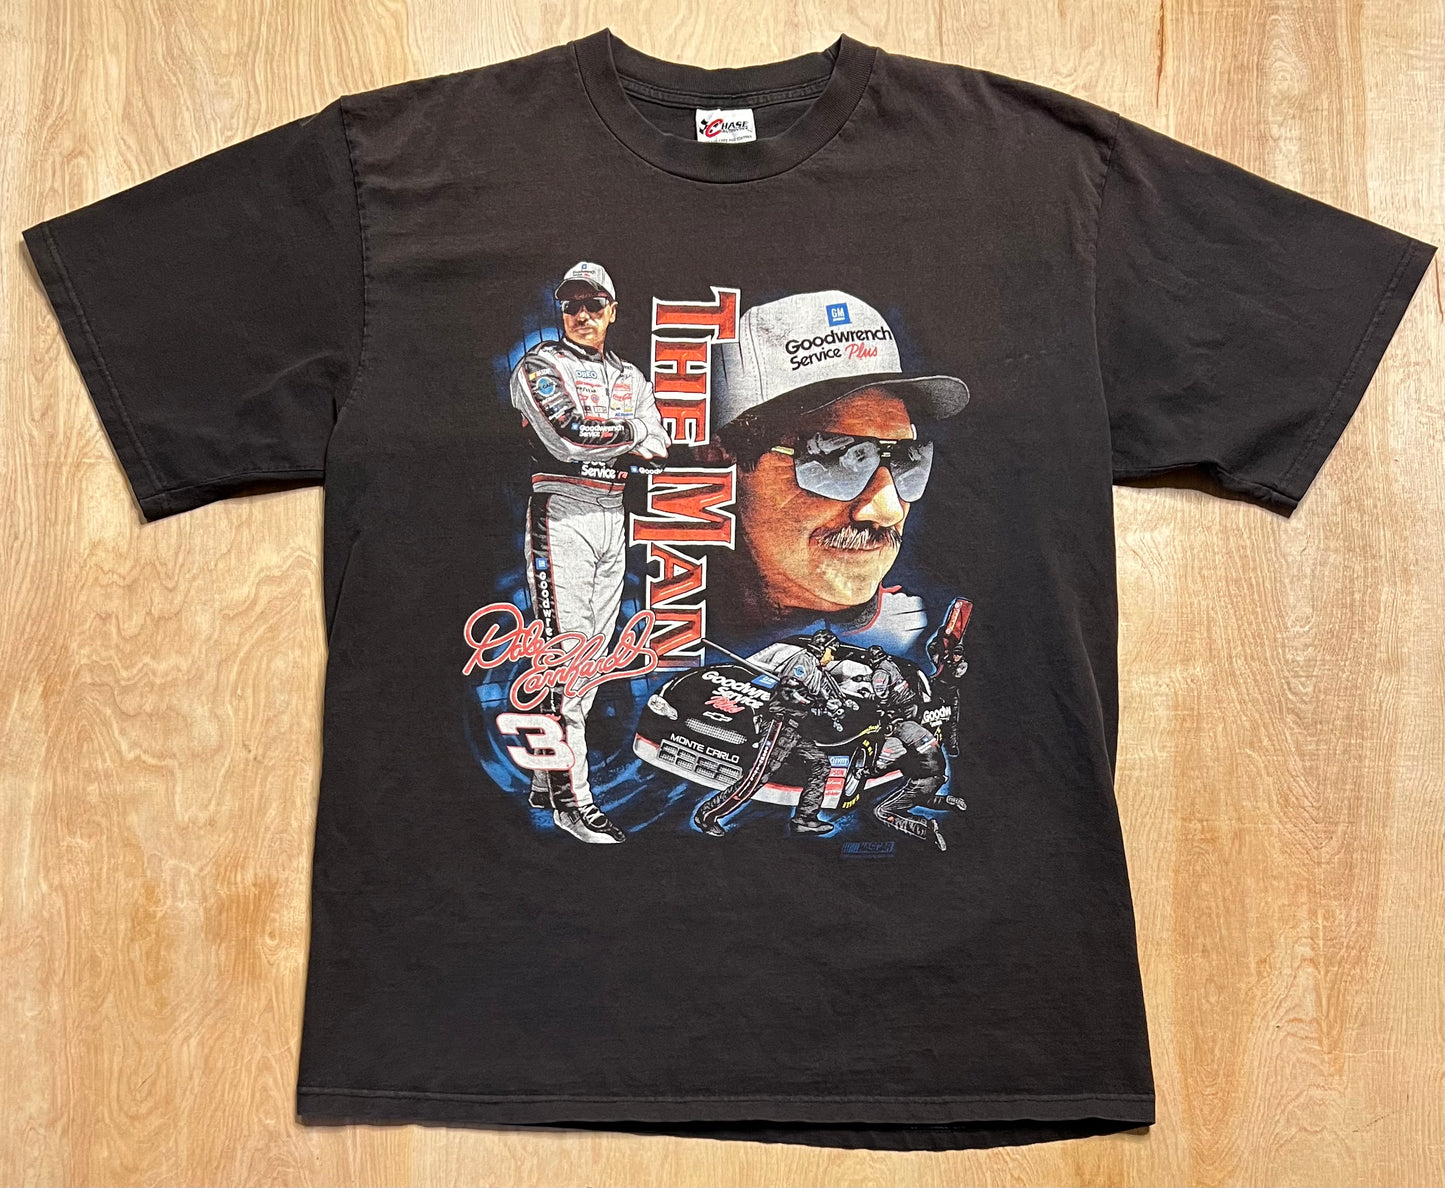 Vintage Dale Earnhardt "The Man" Chase T-Shirt